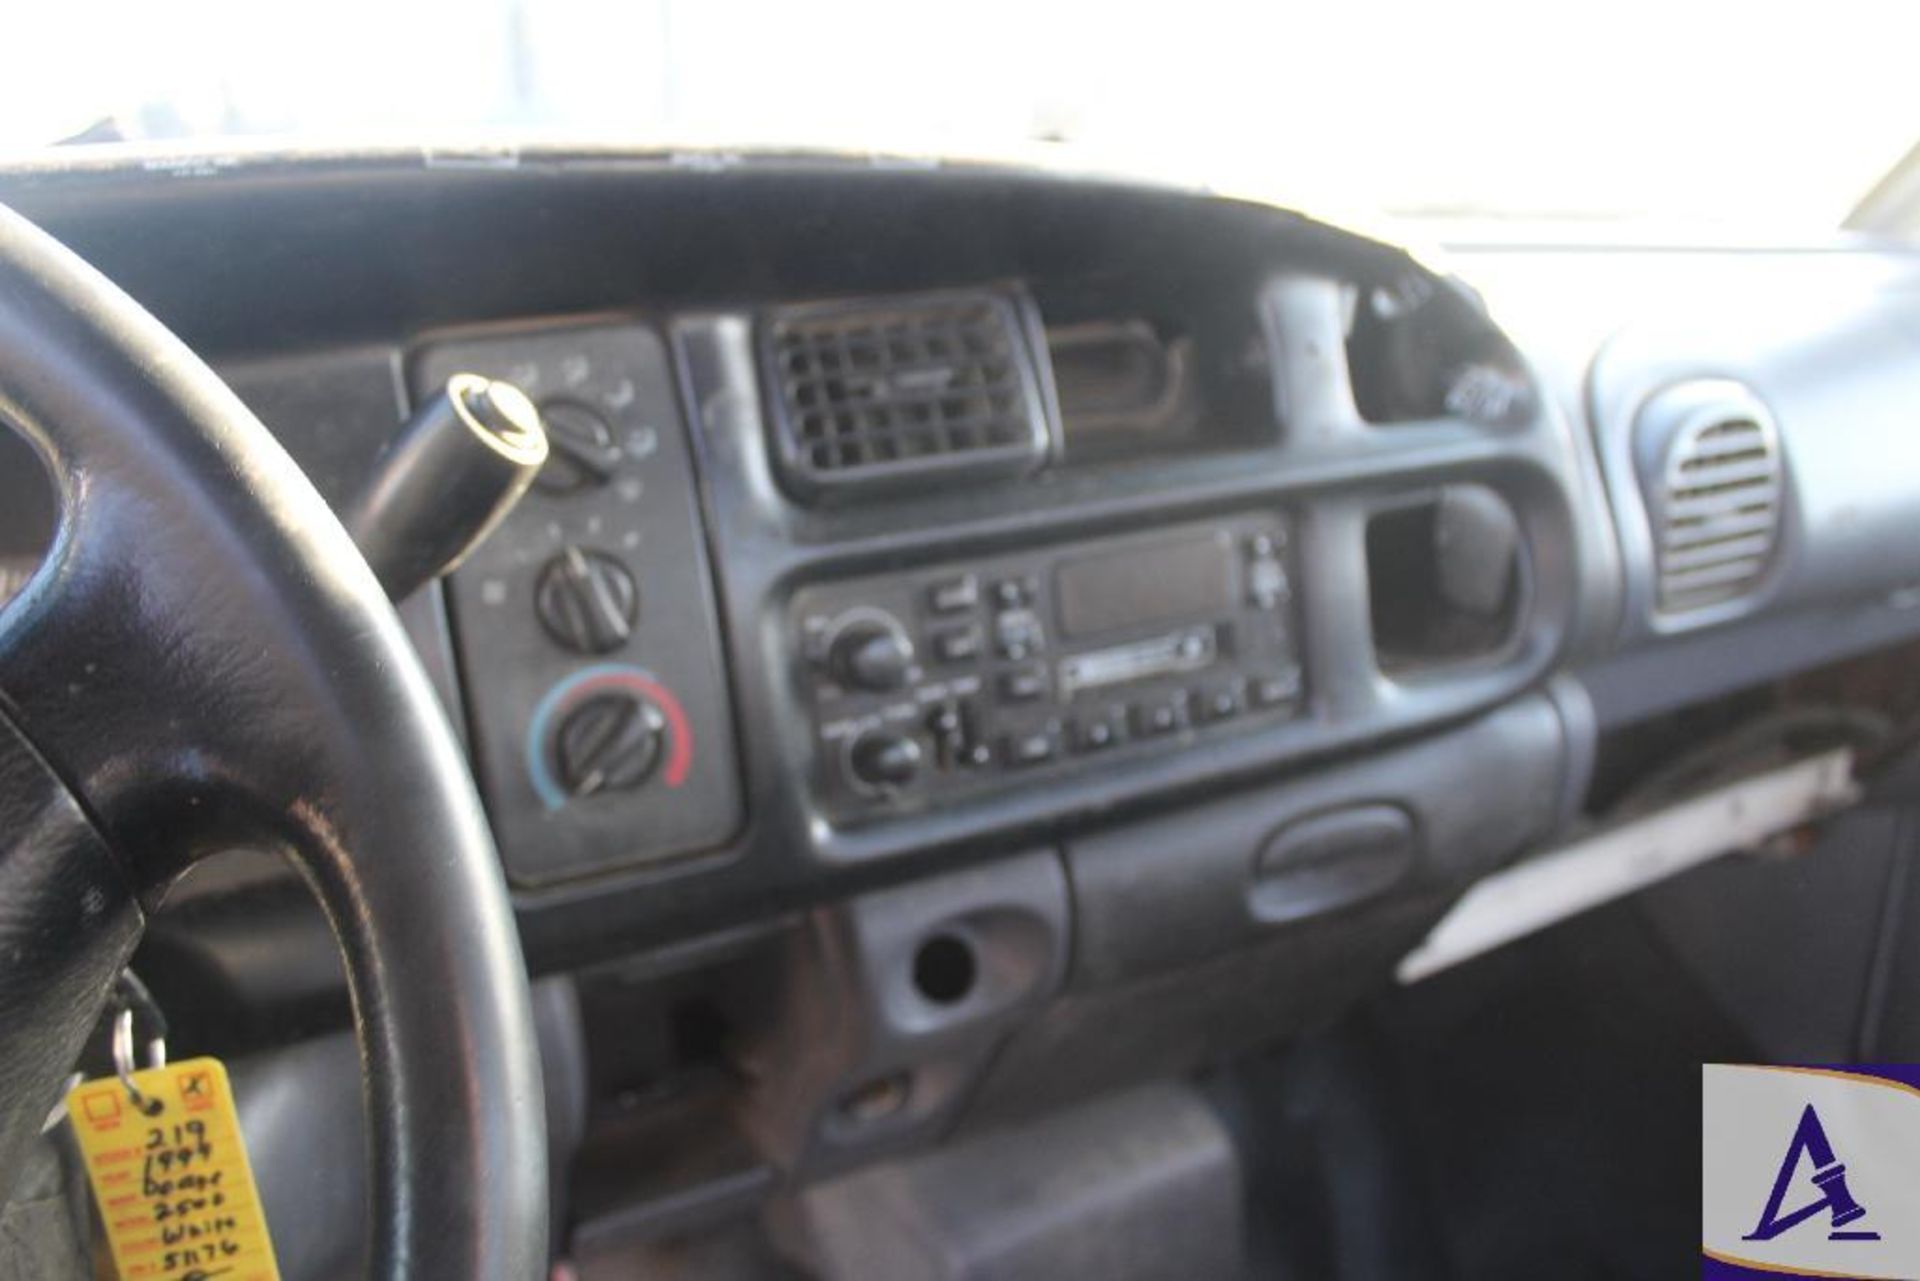 1999 Dodge RAM 2500 Single Cab Truck with Dump Bed - Image 10 of 19